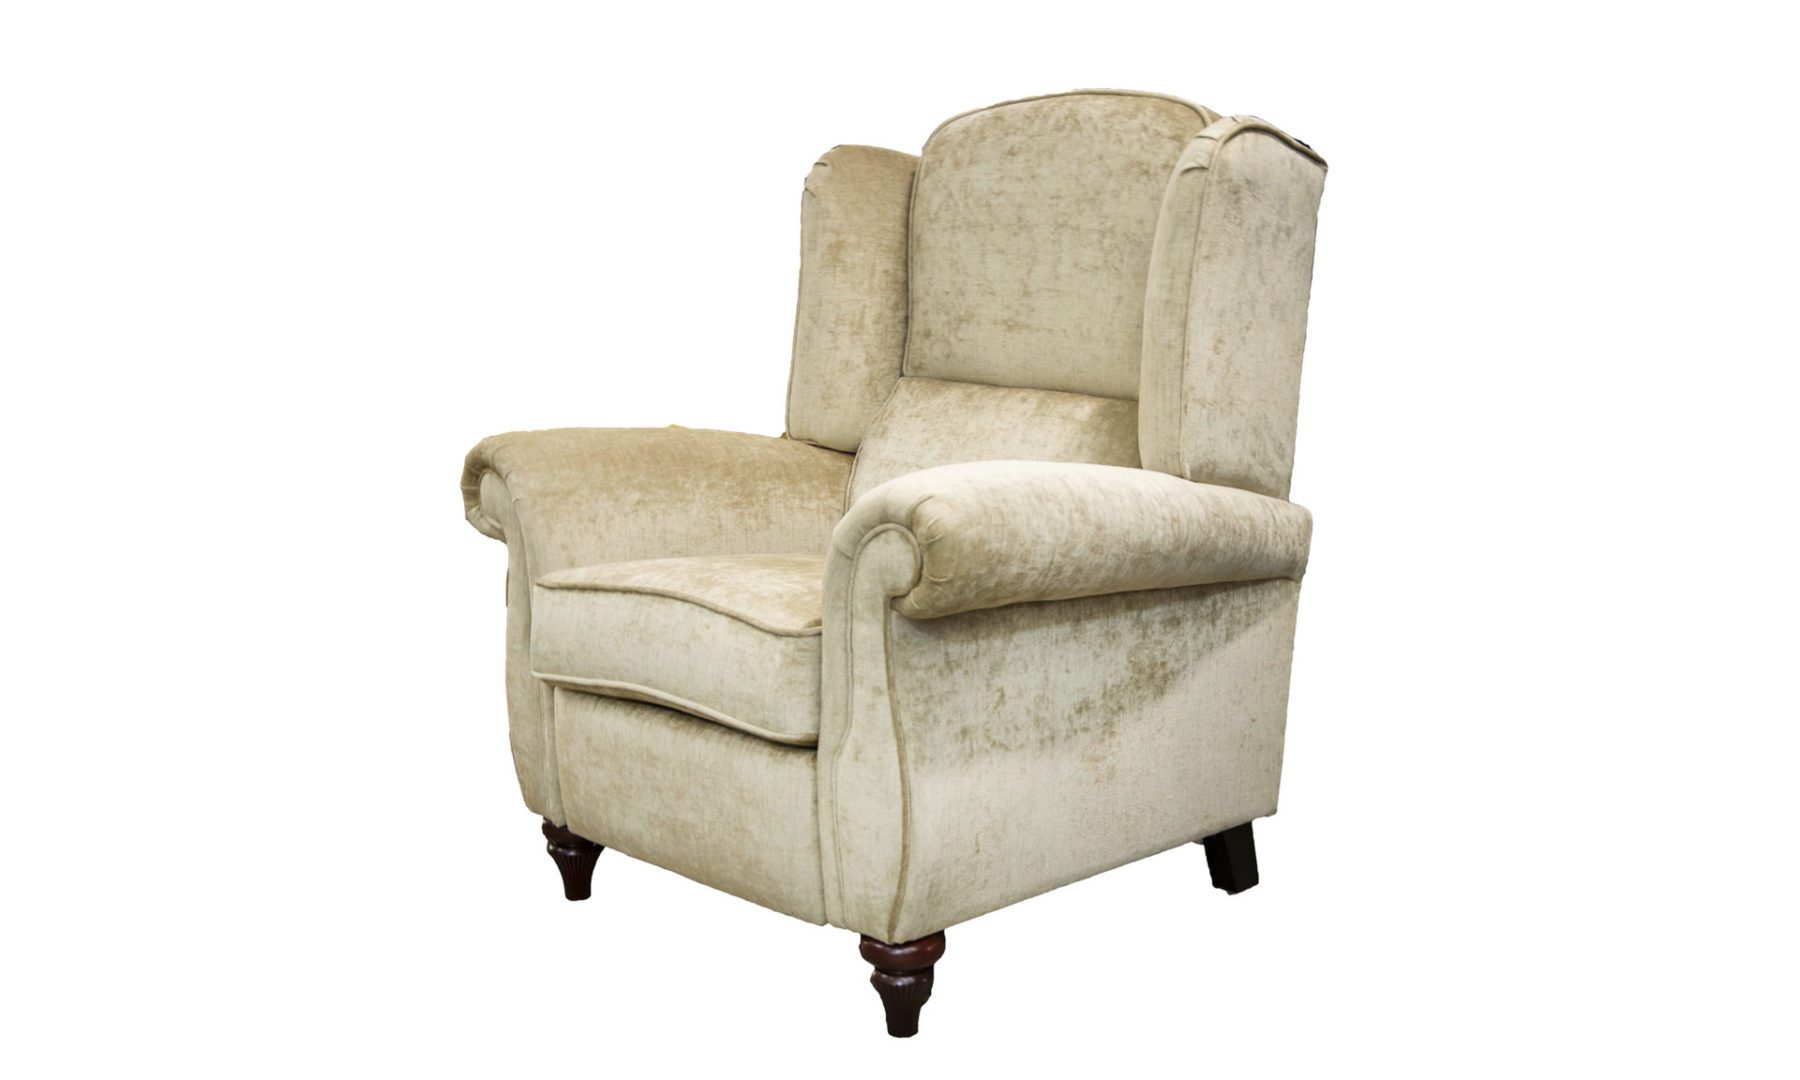 Greville Recliner Chair in Edinburgh Biscuit, Silver Collection of Fabrics